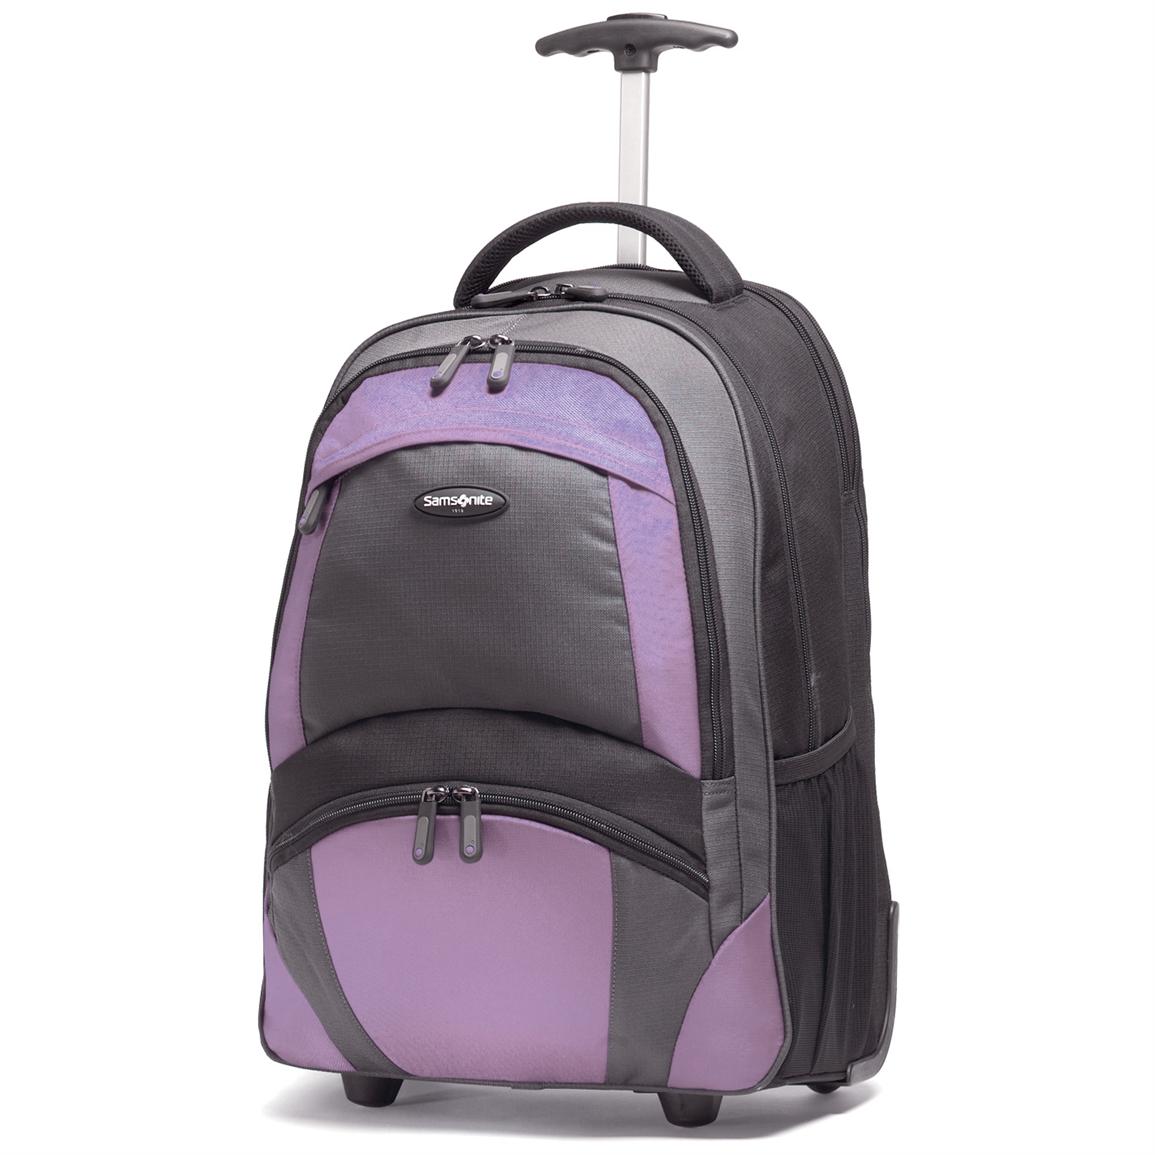 Samsonite Backpack Products For Sale | IUCN Water